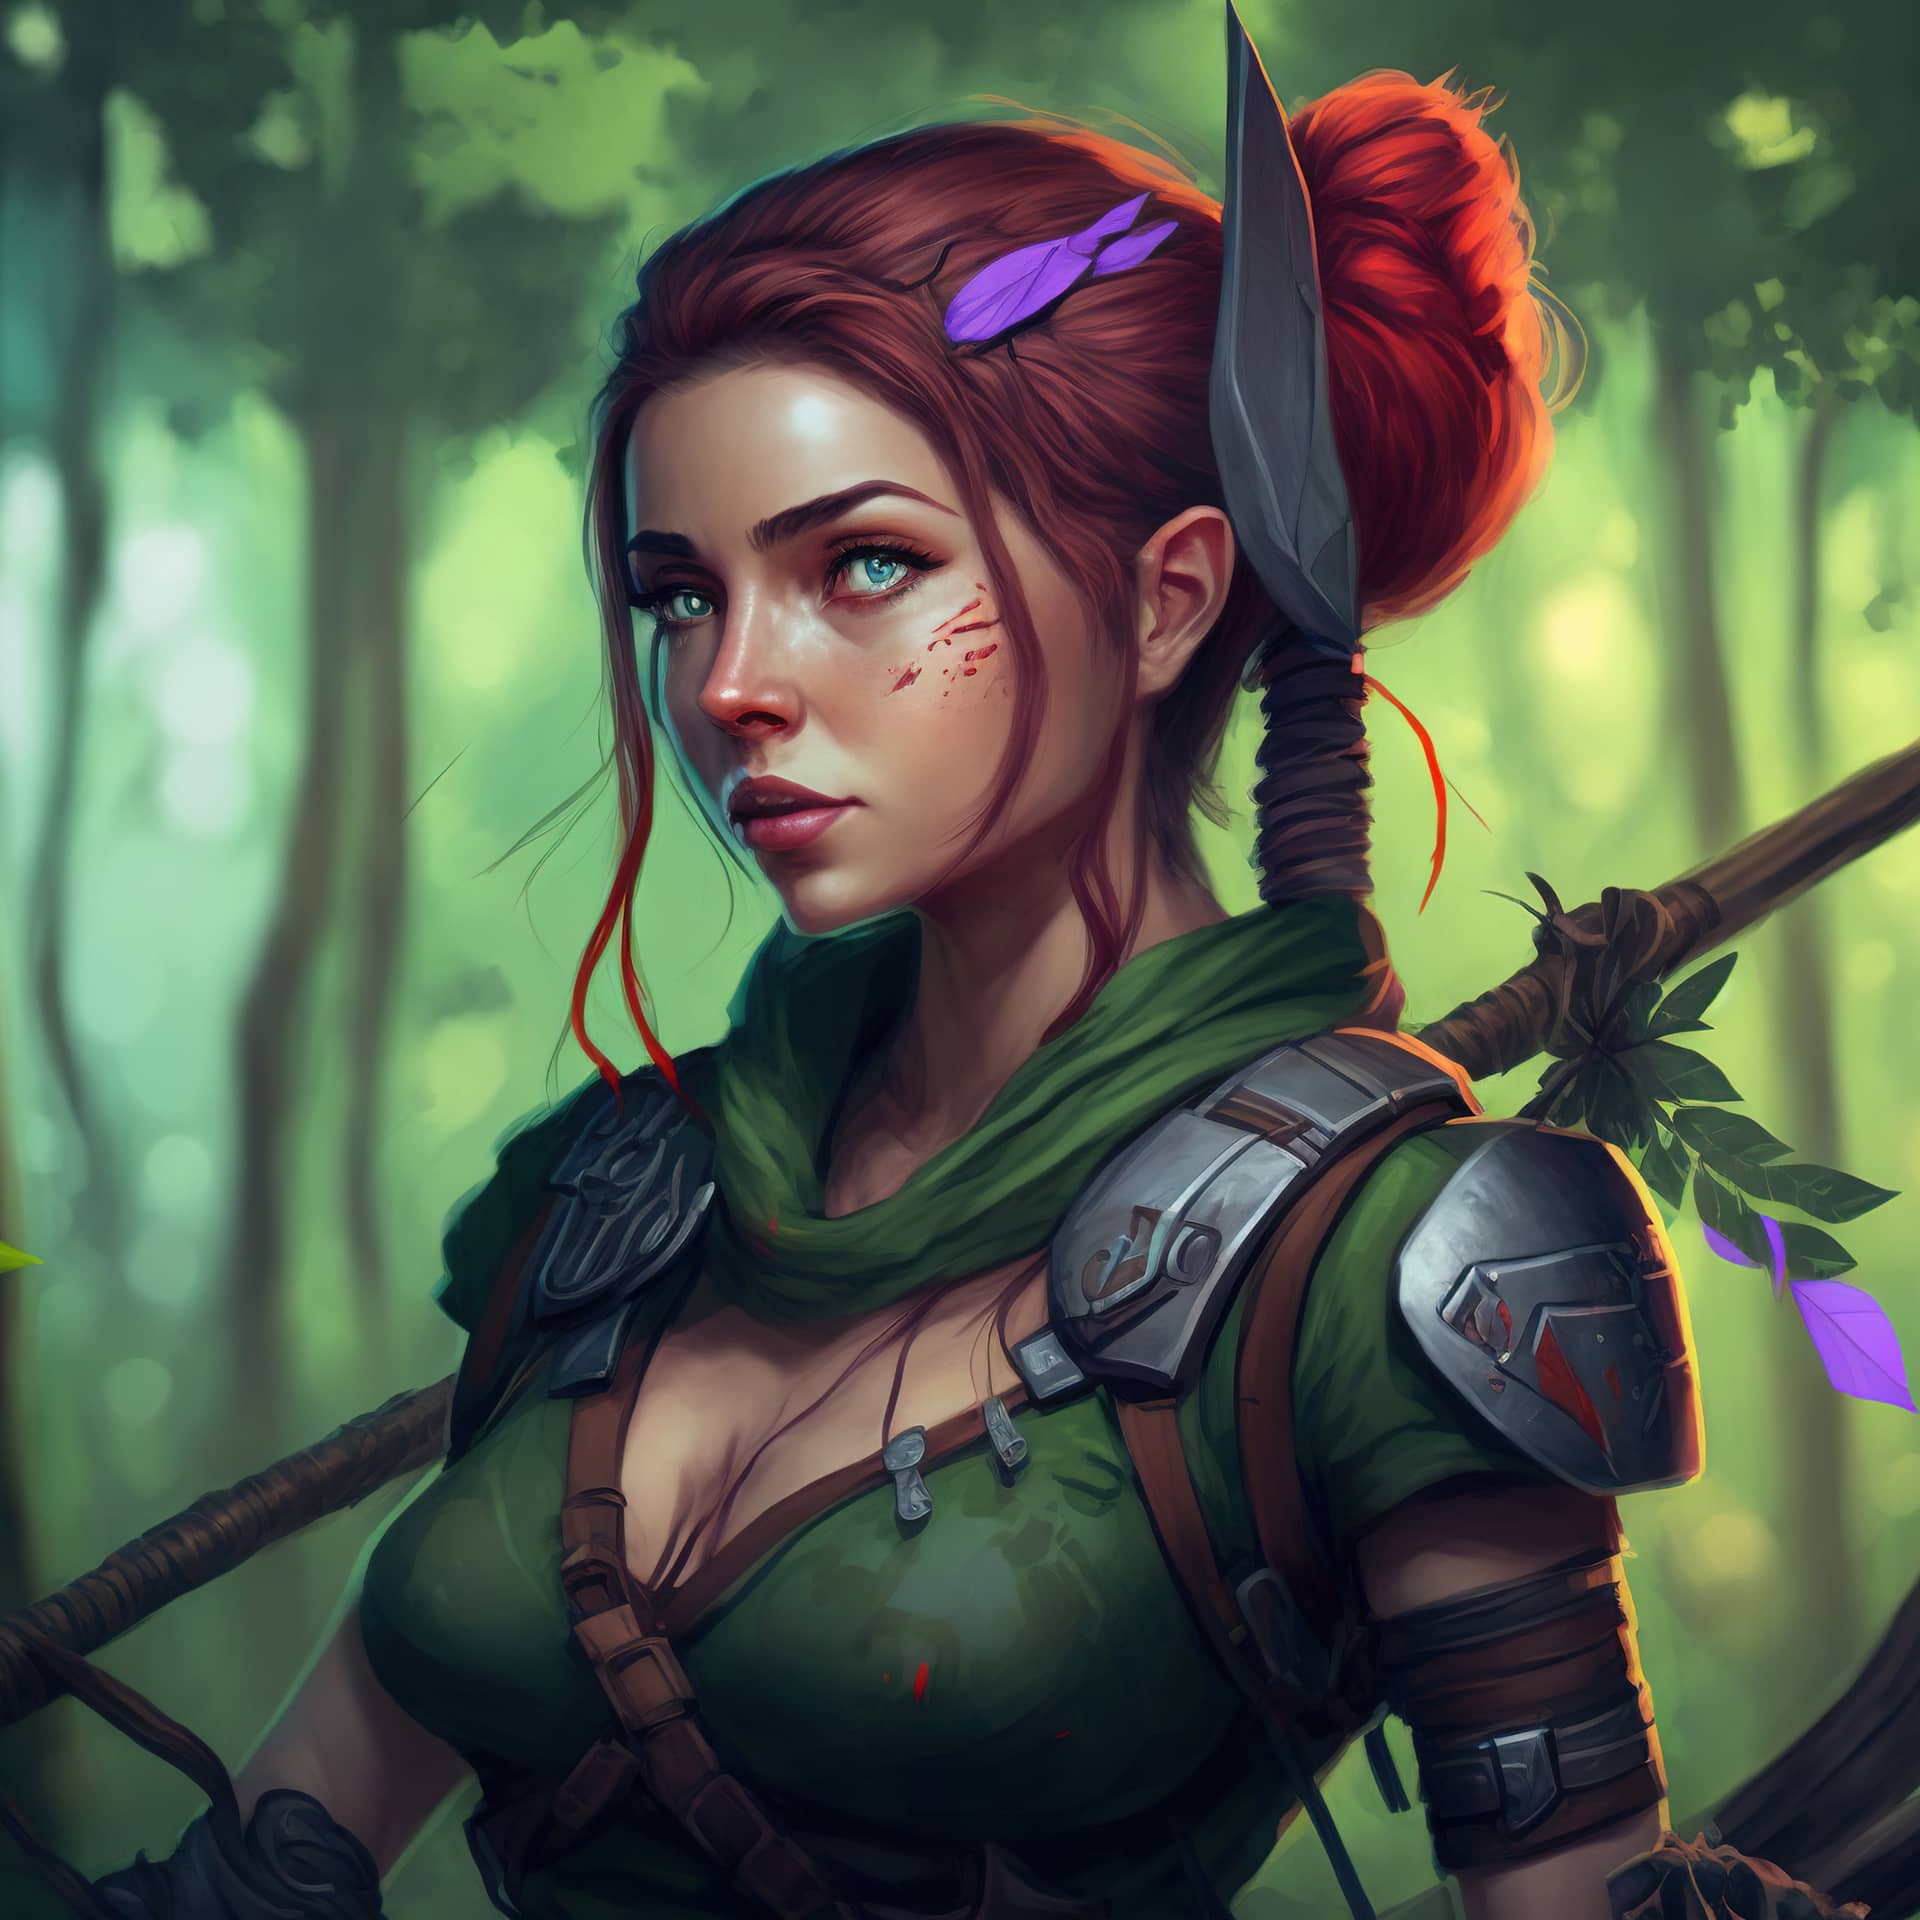 Woman hunter battlefield with bow digital art style illustration painting